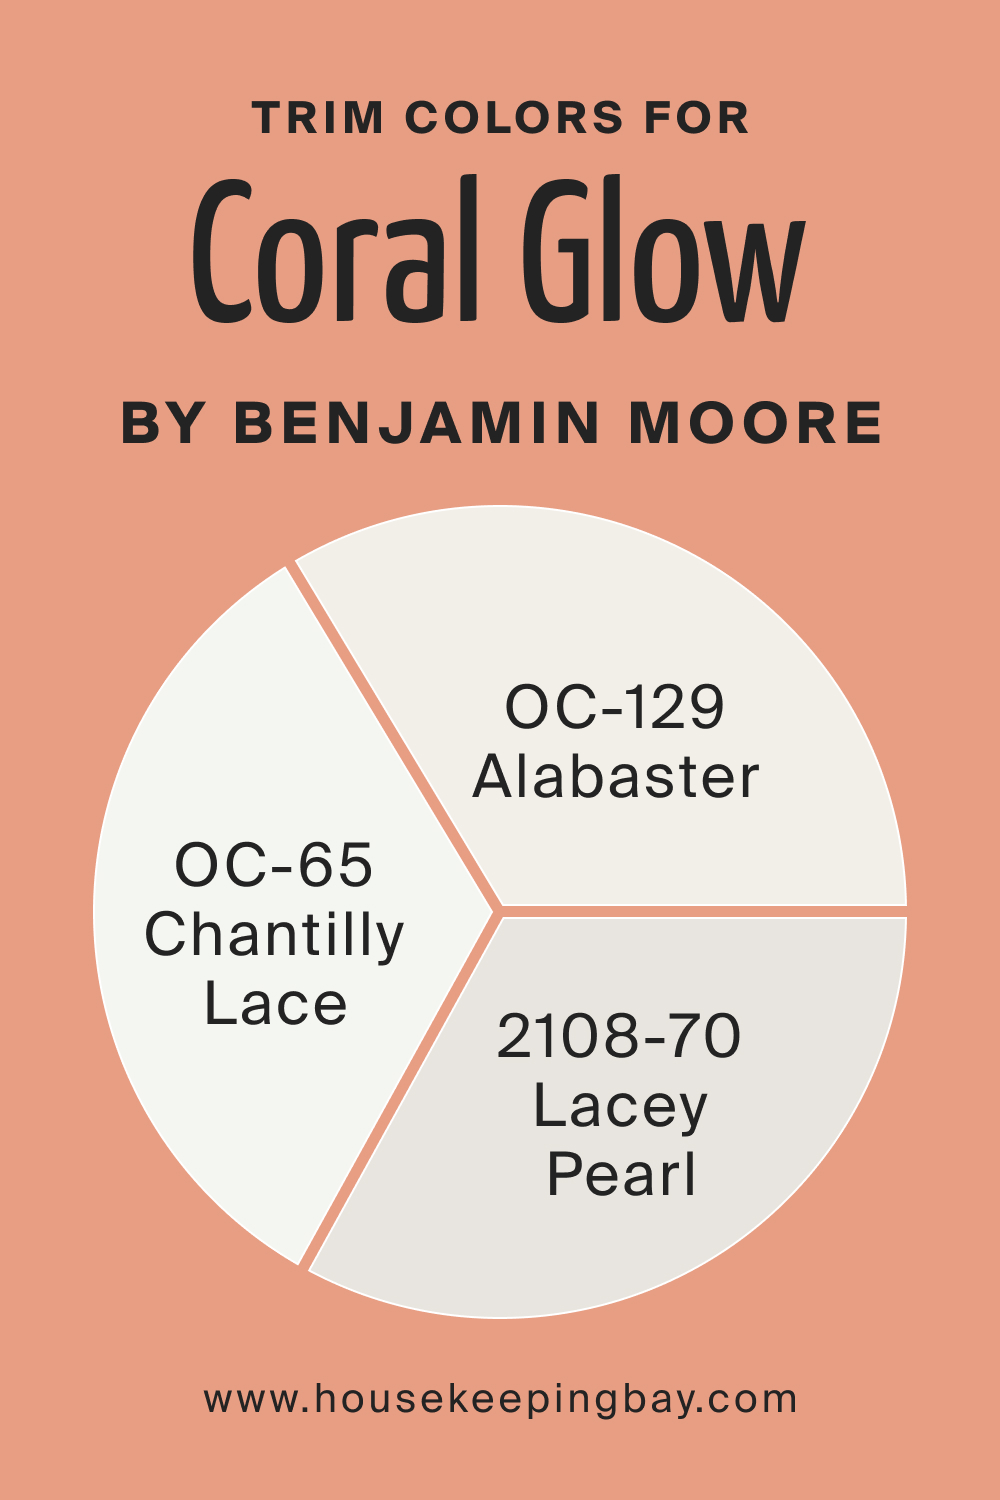 Trim Colors for Coral Glow 026 by Benjamin Moore